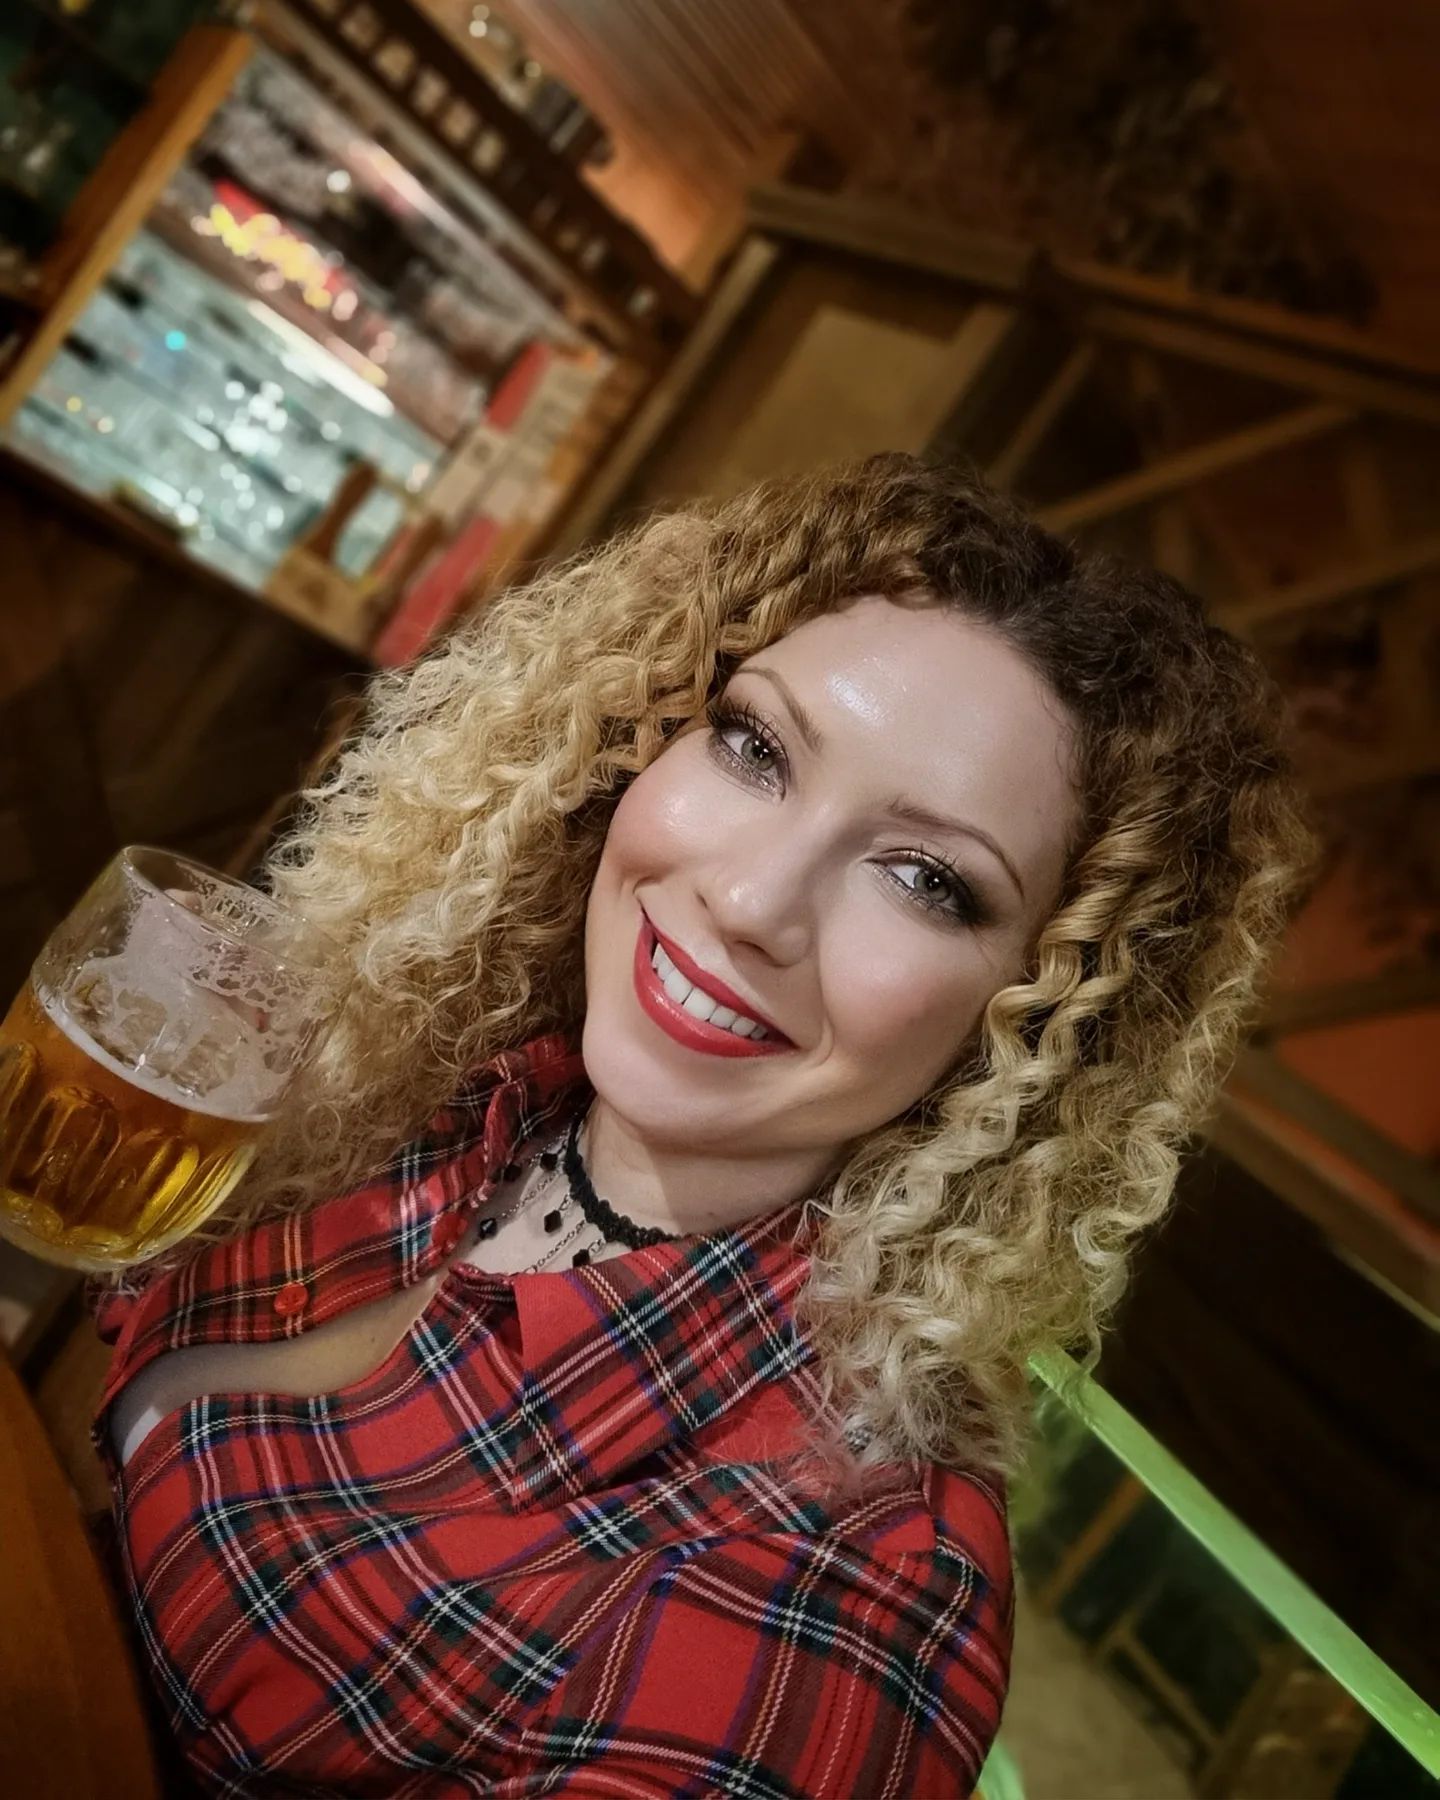 Private new year event in Kyvadlo.
How to get away with your age, if you are over 40? Generous décolleté, red lips and curly hair 💋 I am sure I could still fool someone by saying I am 38 🤣
.
.
.
.
.
.
.
.
#curlyhair #curlyhairstyles #curly #redlips #redlipstick #beerstagram #beergirl #tartan #blonde #over40fashion #beerporn #beer #celebration #smiles